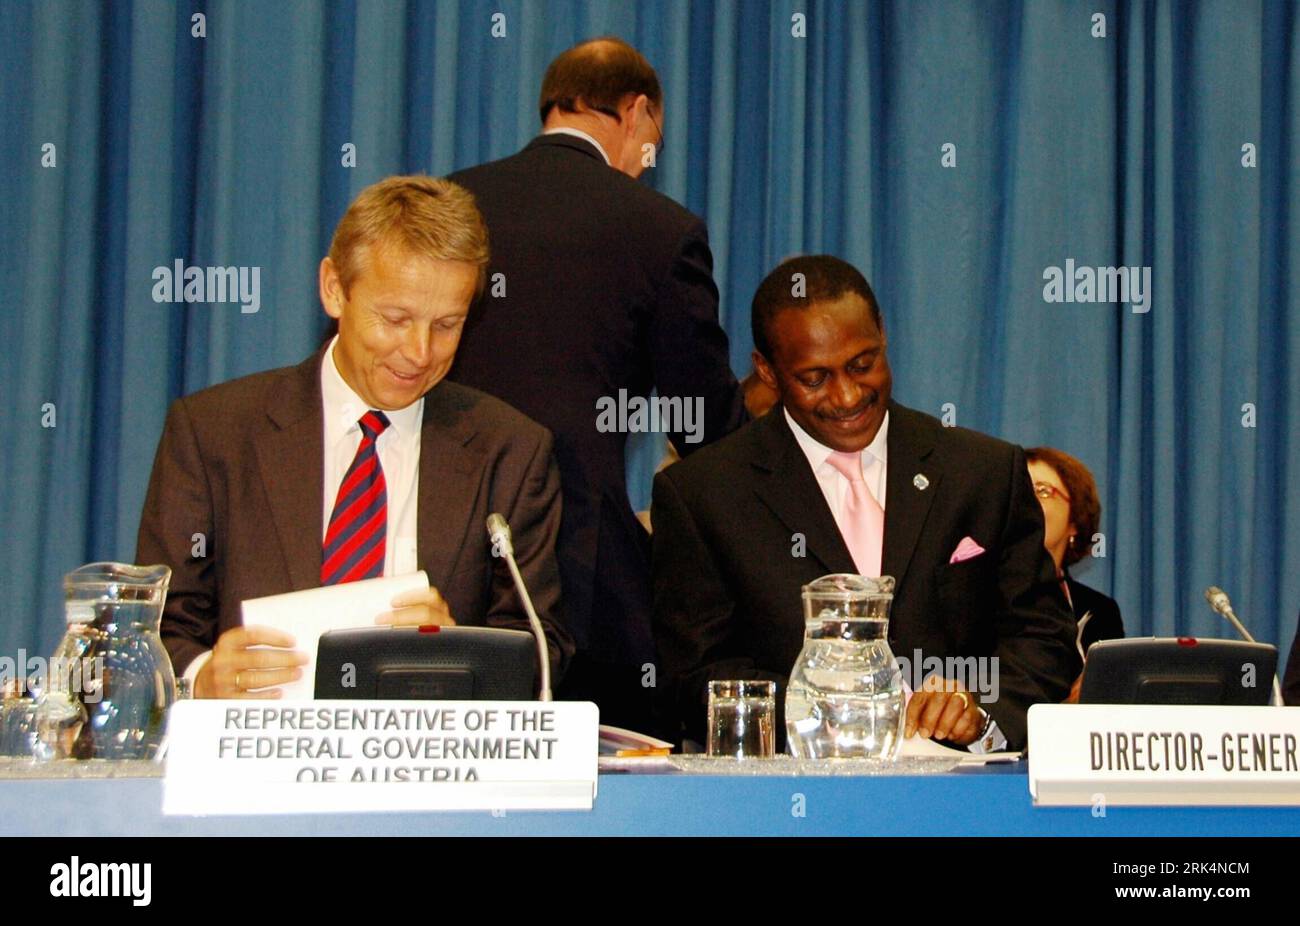 Bildnummer: 53650732  Datum: 07.12.2009  Copyright: imago/Xinhua (091207) -- VIENNA, Dec. 7, 2009 (Xinhua) -- Kandeh K. Yumkella (R), director-general of the UN Industrial Development Organization (UNIDO), attends the 13th session of UNIDO opened in Vienna, Austria, on Dec. 7, 2009. The topic of this year s meeting focuses on green industries and the opportunities they offer for developing countries under current economic circumstance. (Xinhua/Liu Gang) (zl) (1)AUSTRIA-VIENNA-UNIDO PUBLICATIONxNOTxINxCHN Wien People Politik UNIDO industrielle Entwicklung kbdig xub 2009 quer premiumd o0 Mann, k Stock Photo